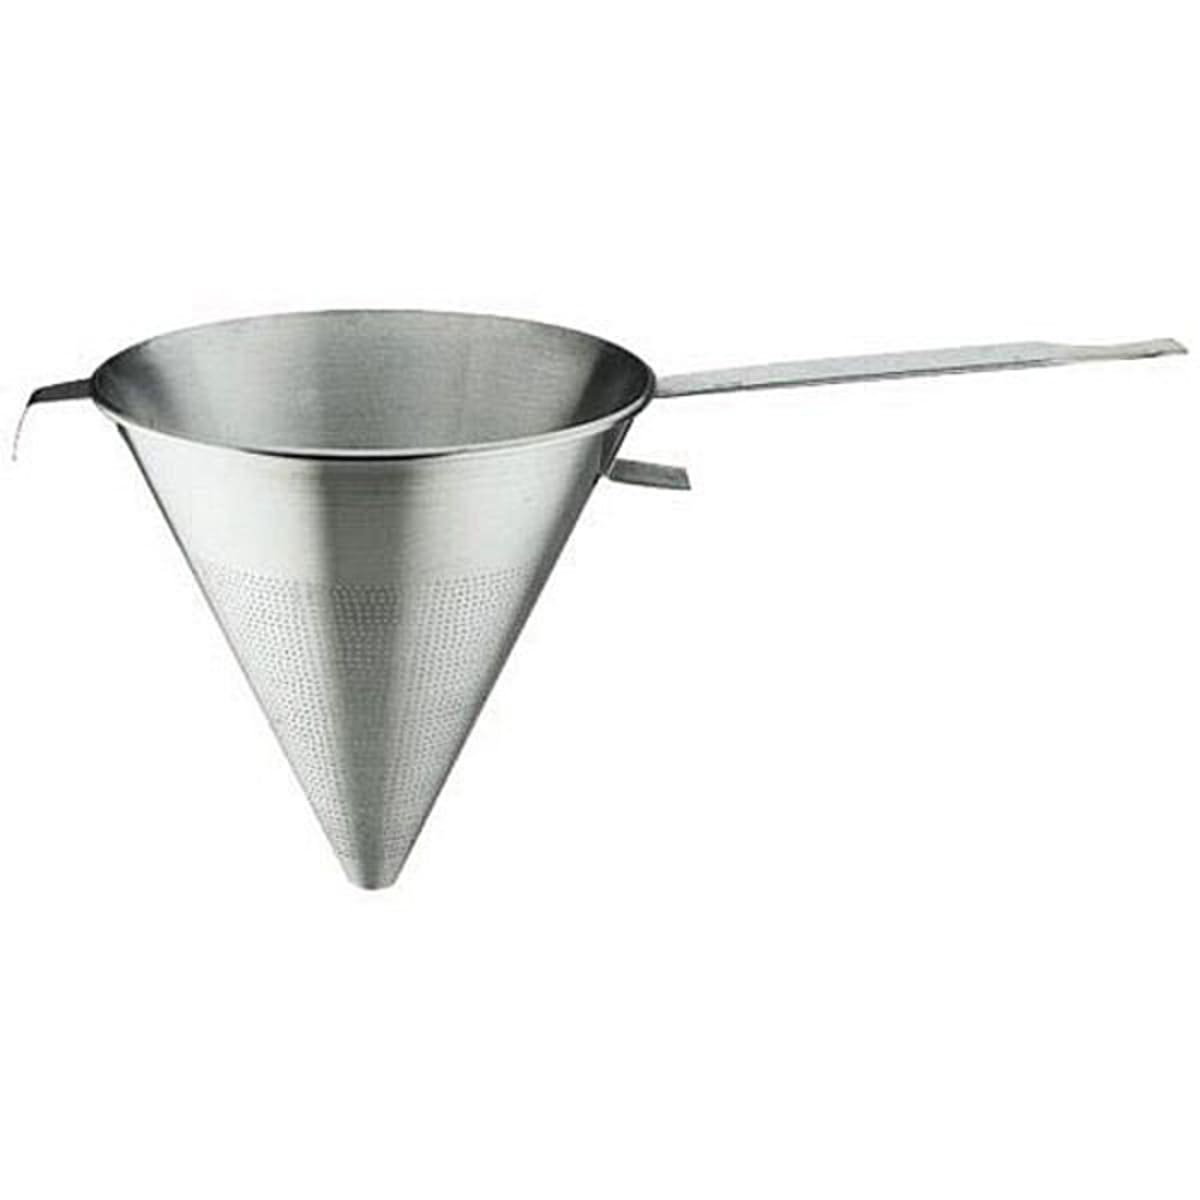 Stainless Steel Conical Vegetable Strainer, 9.25 Qt